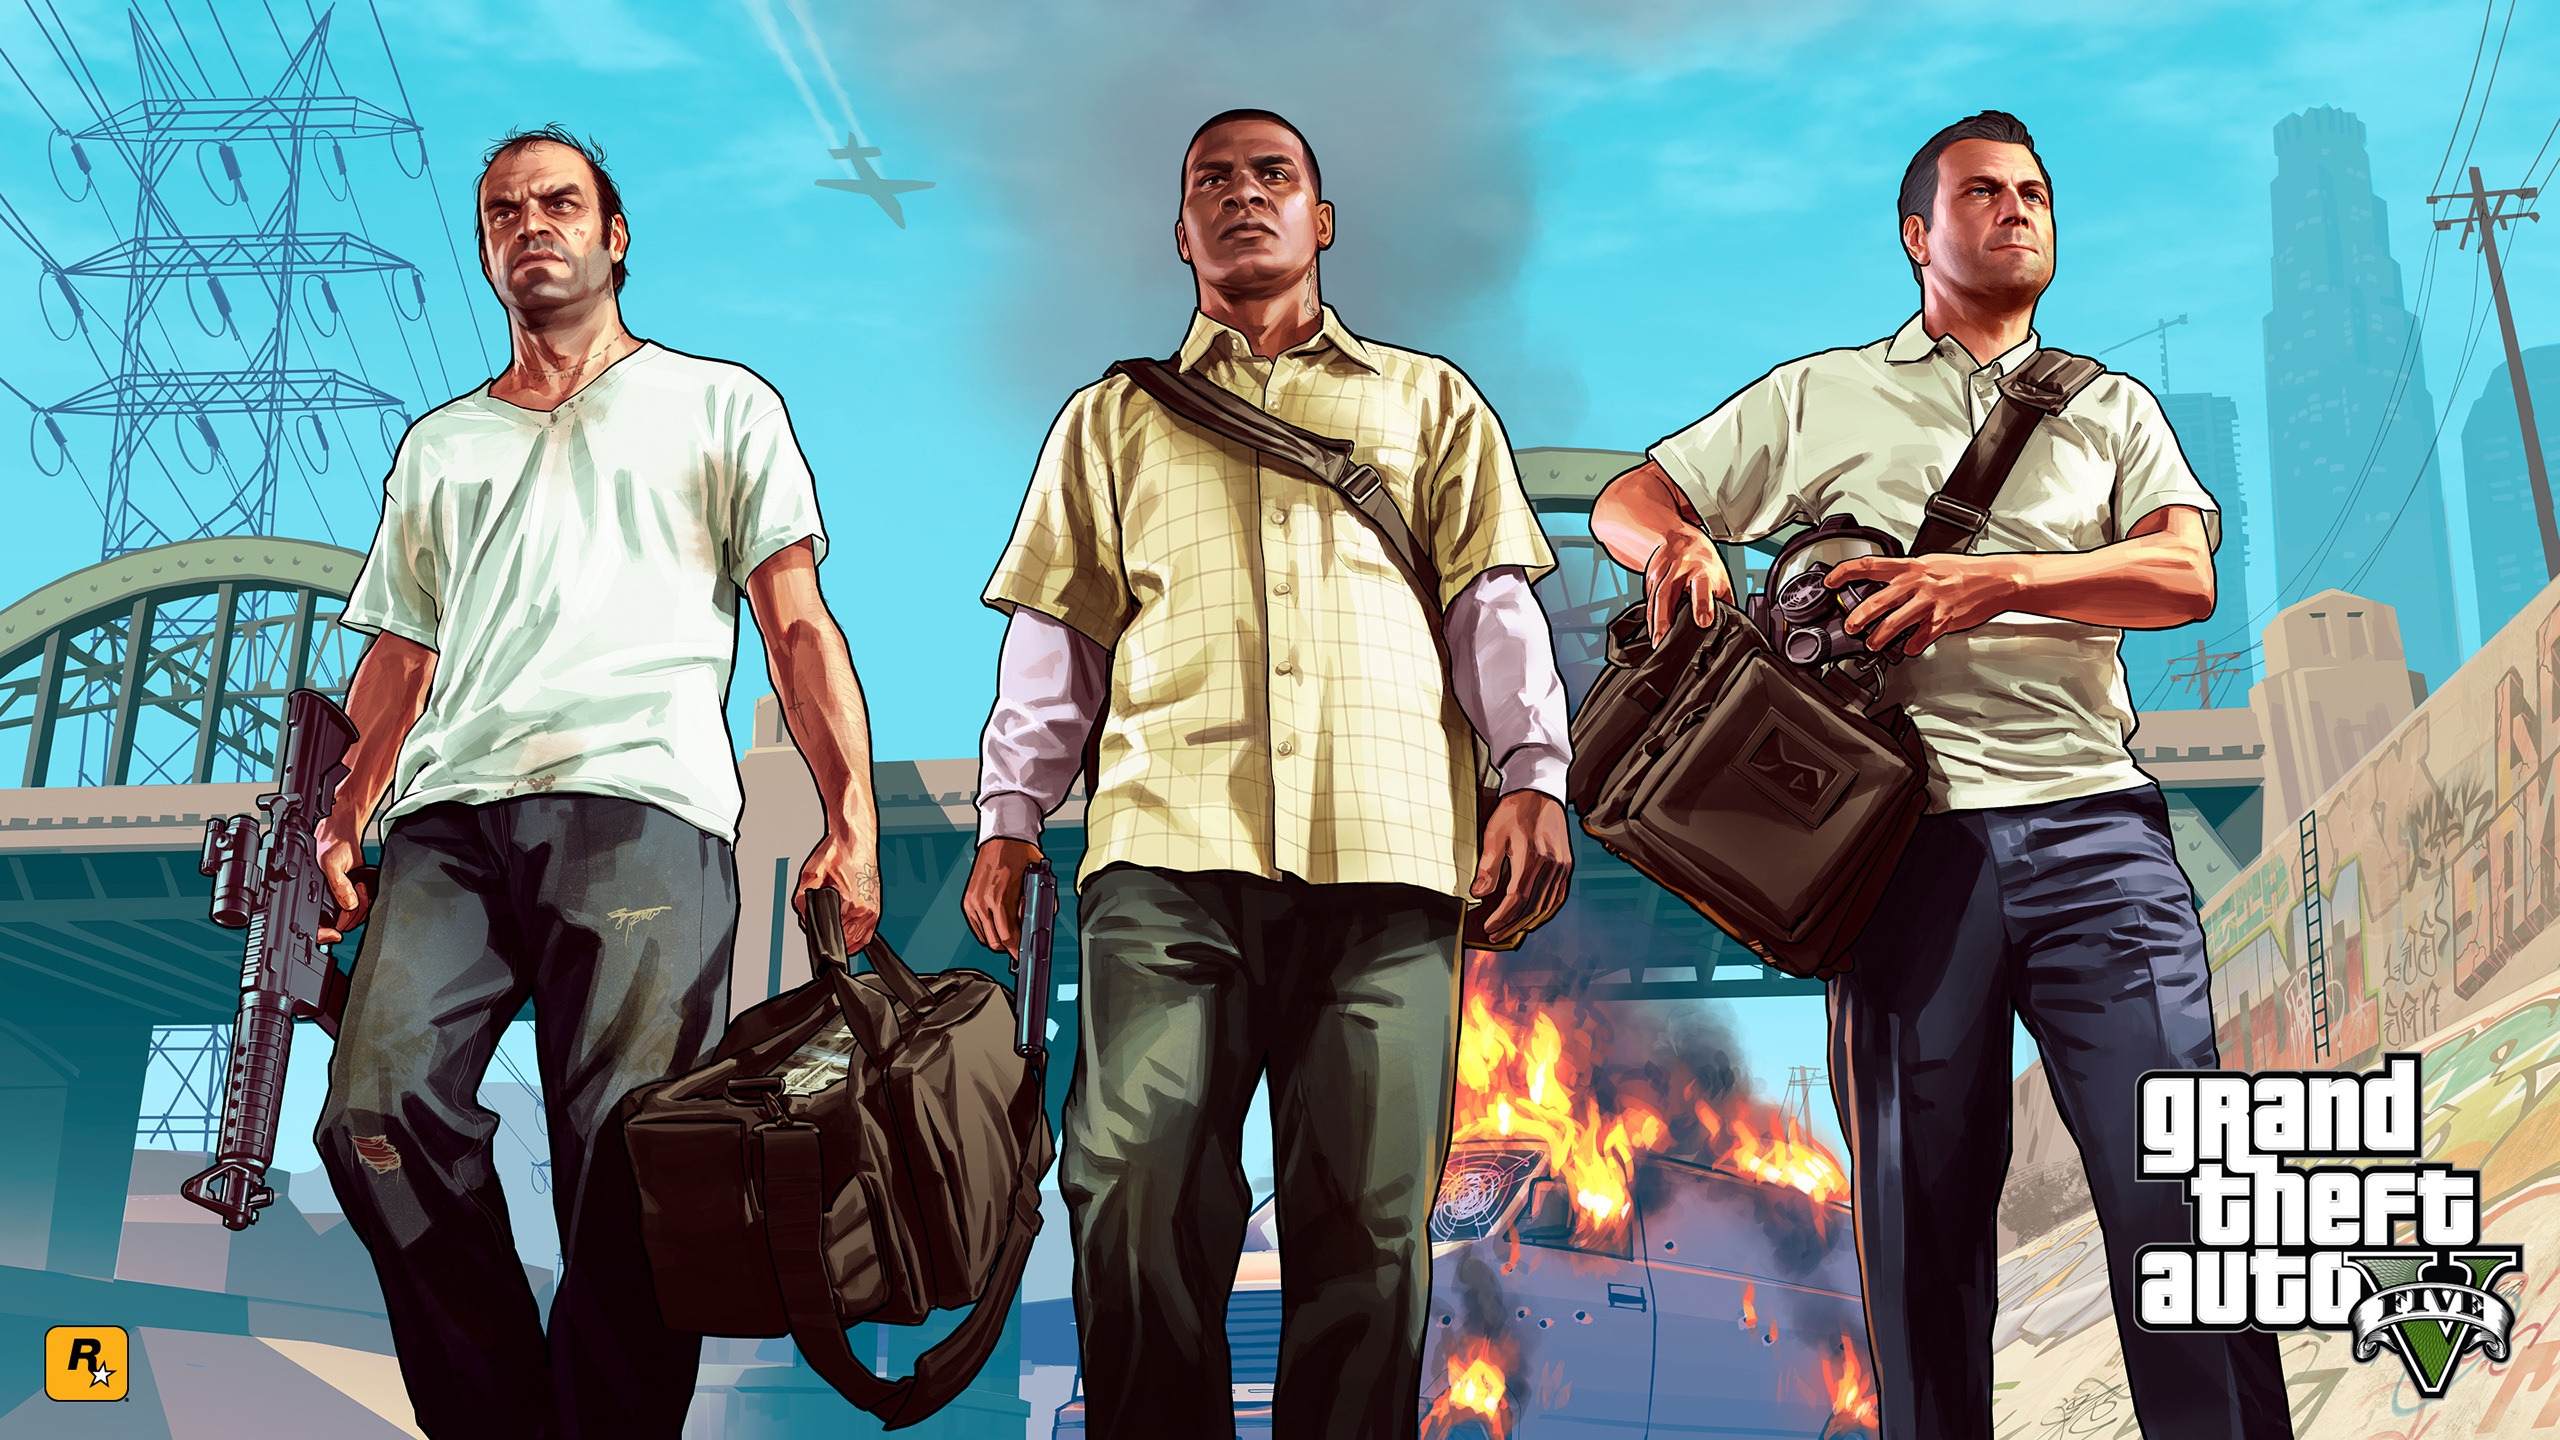 Gta 5 Main Characters for 2560x1440 HDTV resolution